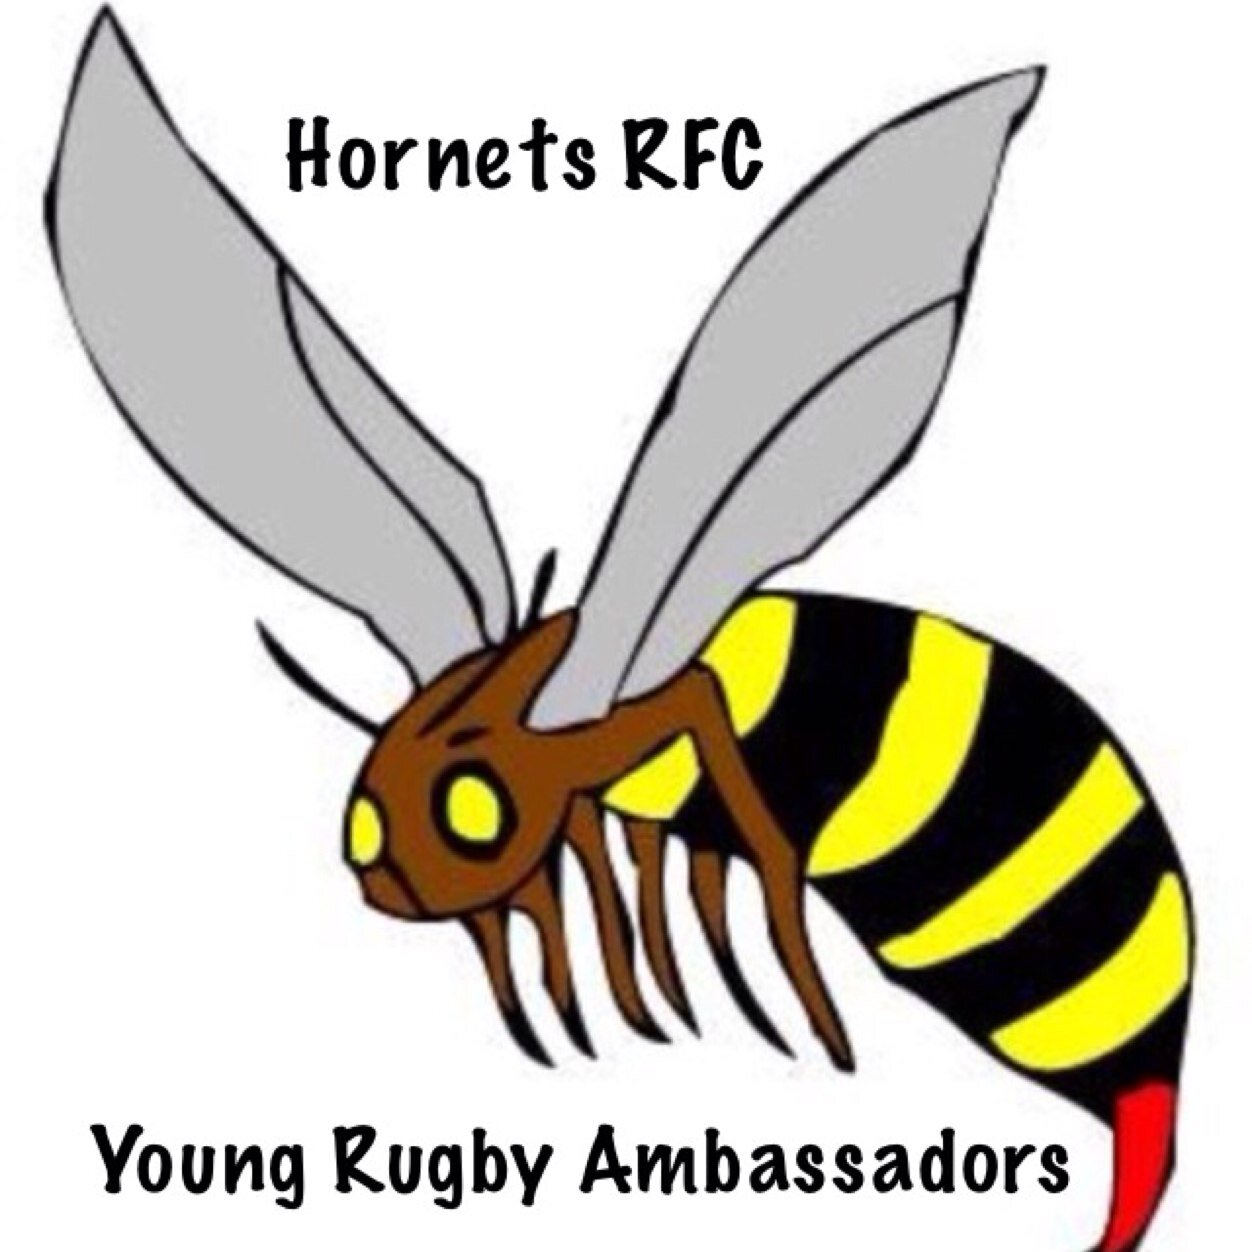 Hornets RFC Young Rugby Ambassidor page giving all the imformation about the events we are holding and about the World Cup happening in 2015.